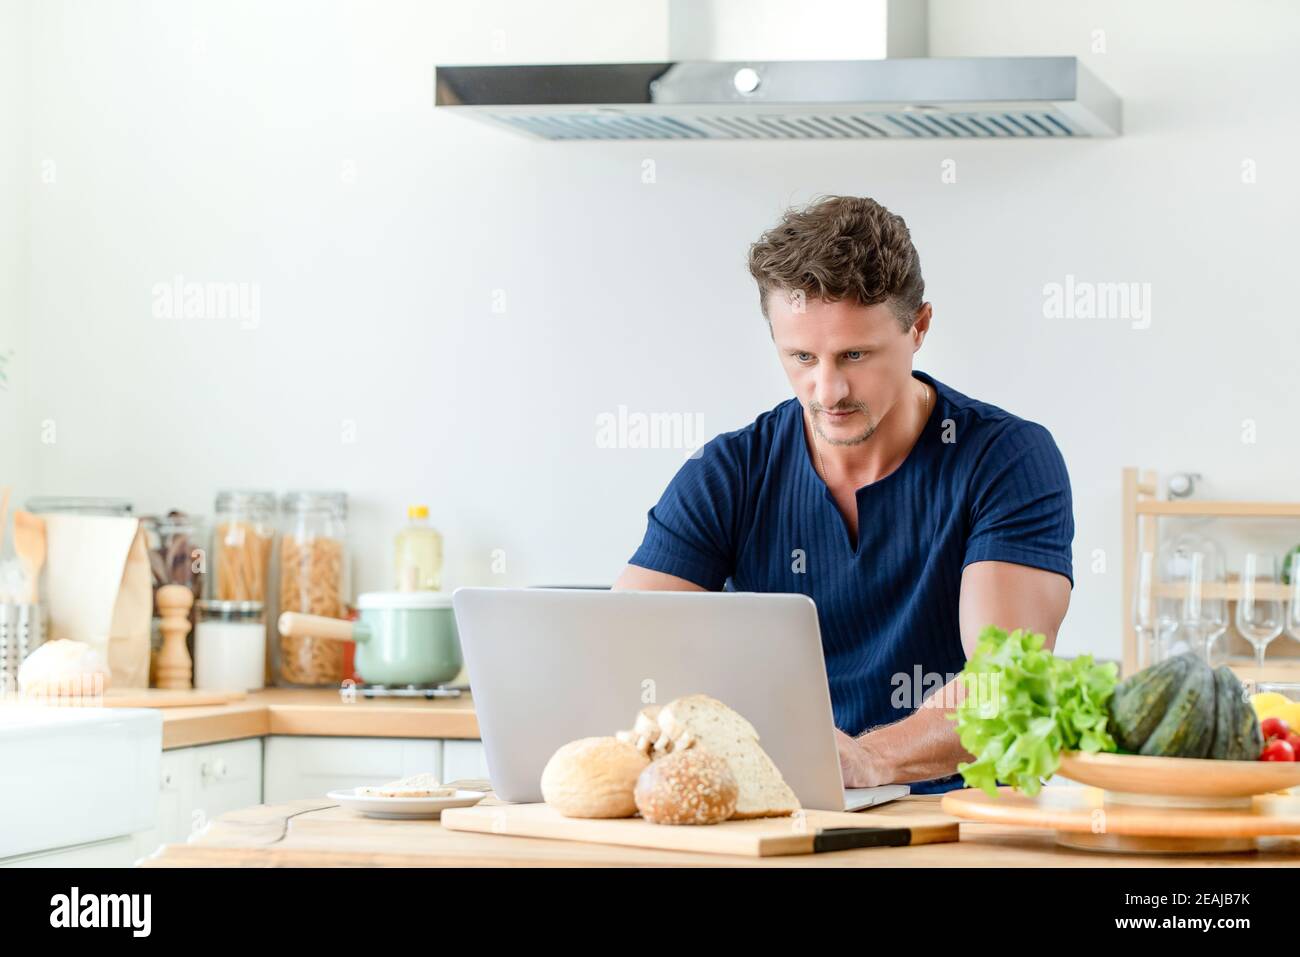 Handsome man having online chatting and working from home at the kitchen Stock Photo